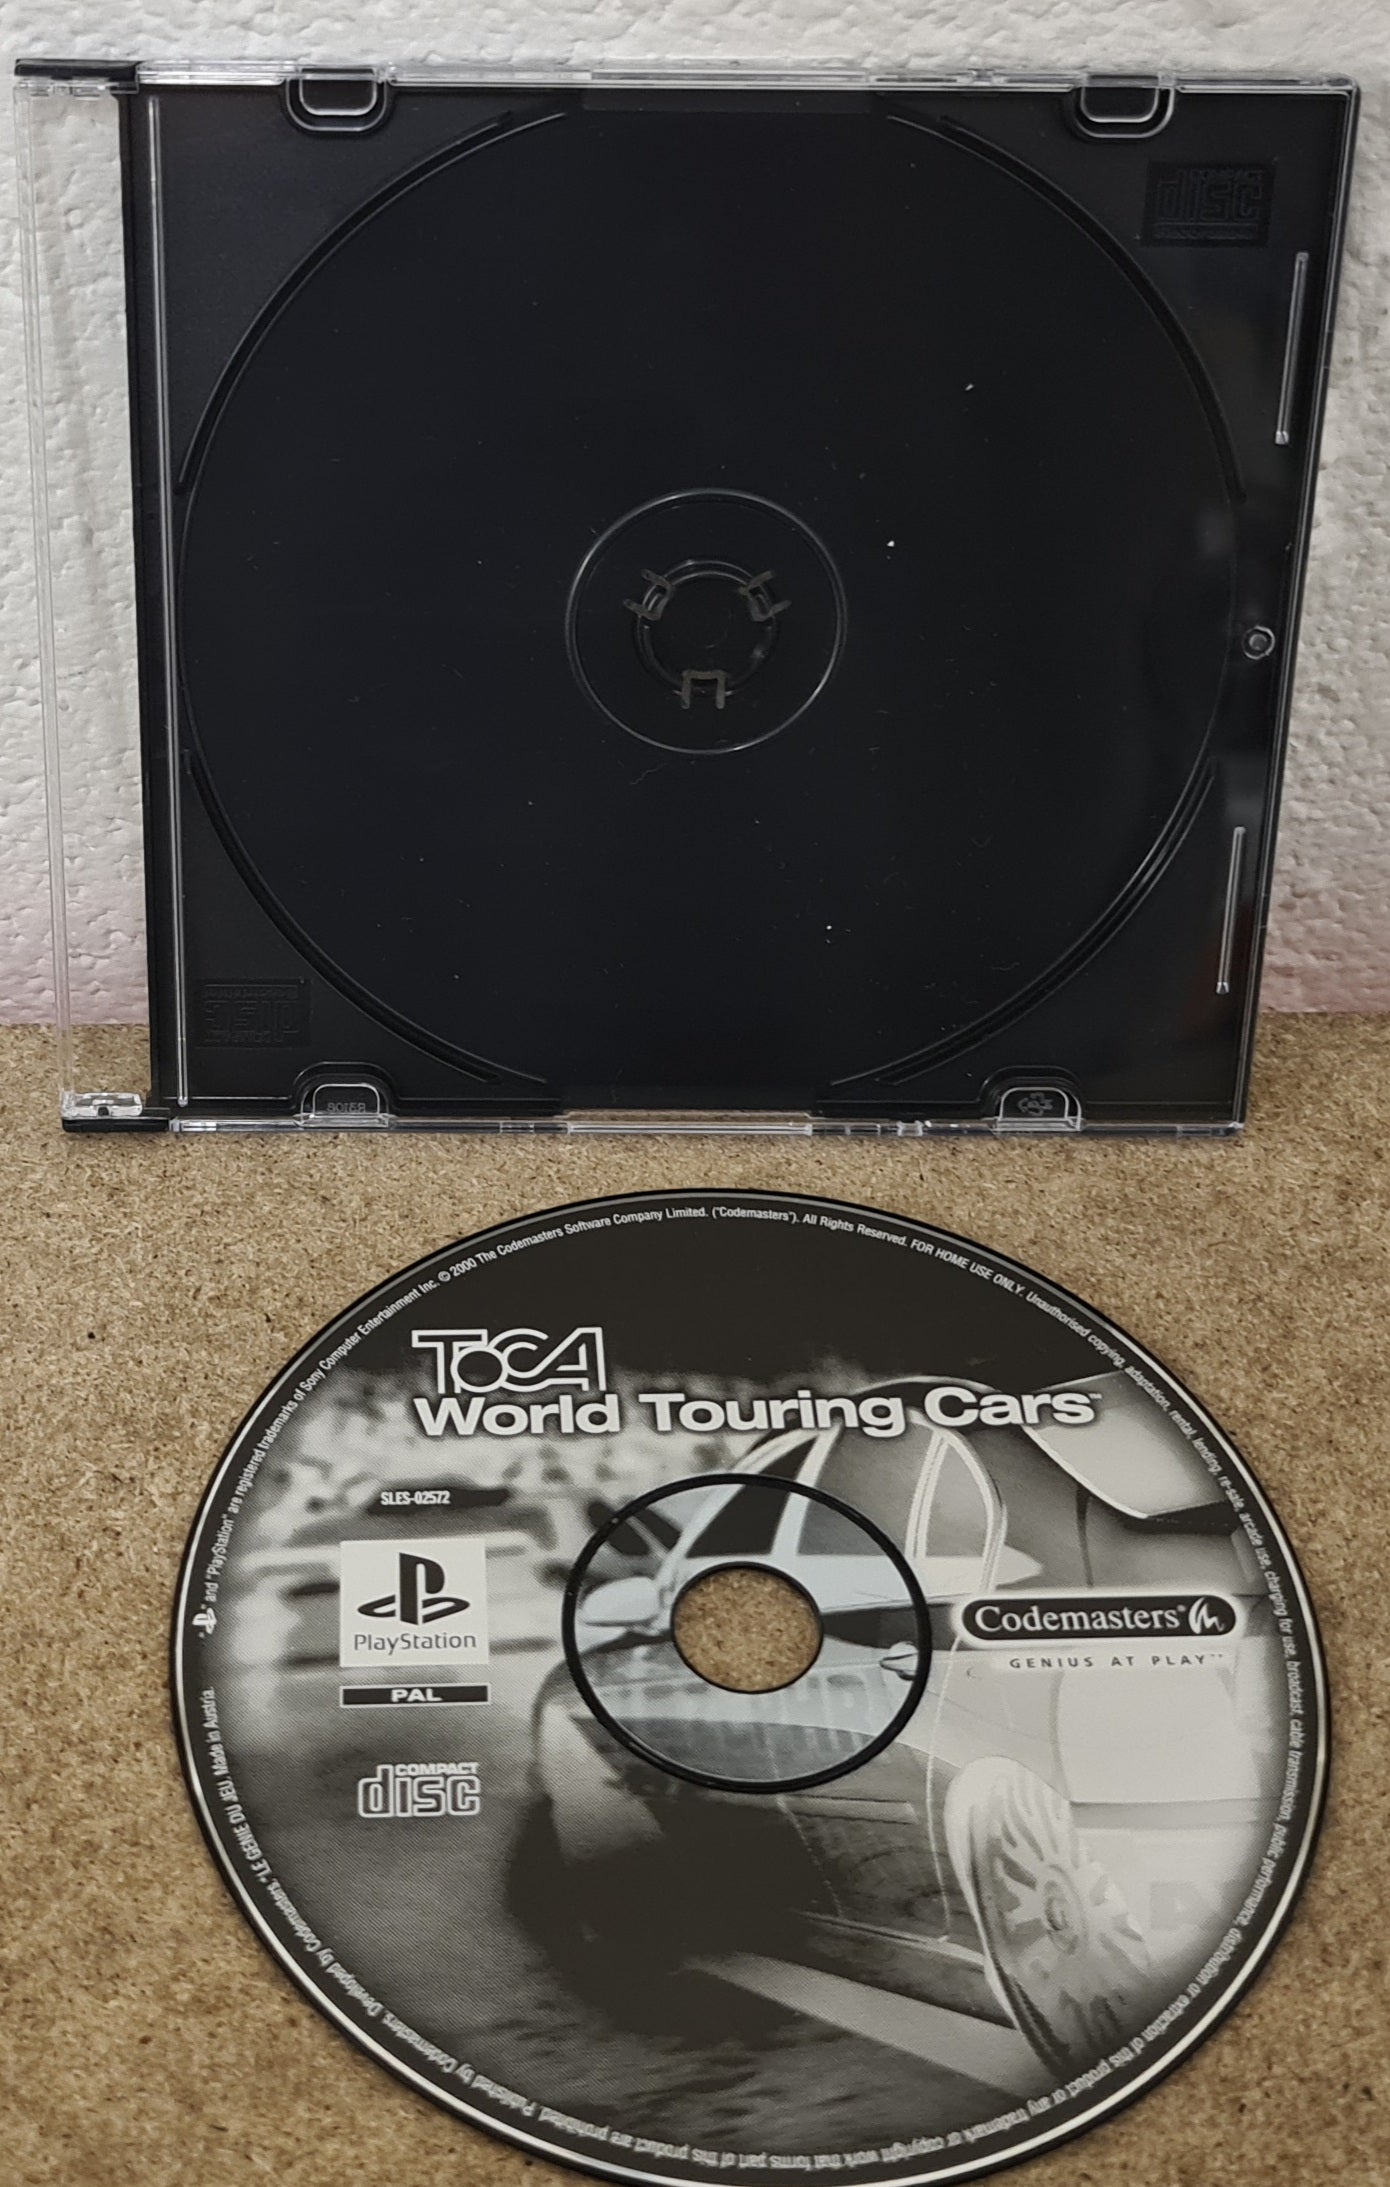 Toca World Touring Cars Sony Playstation 1 (PS1) Game Disc Only